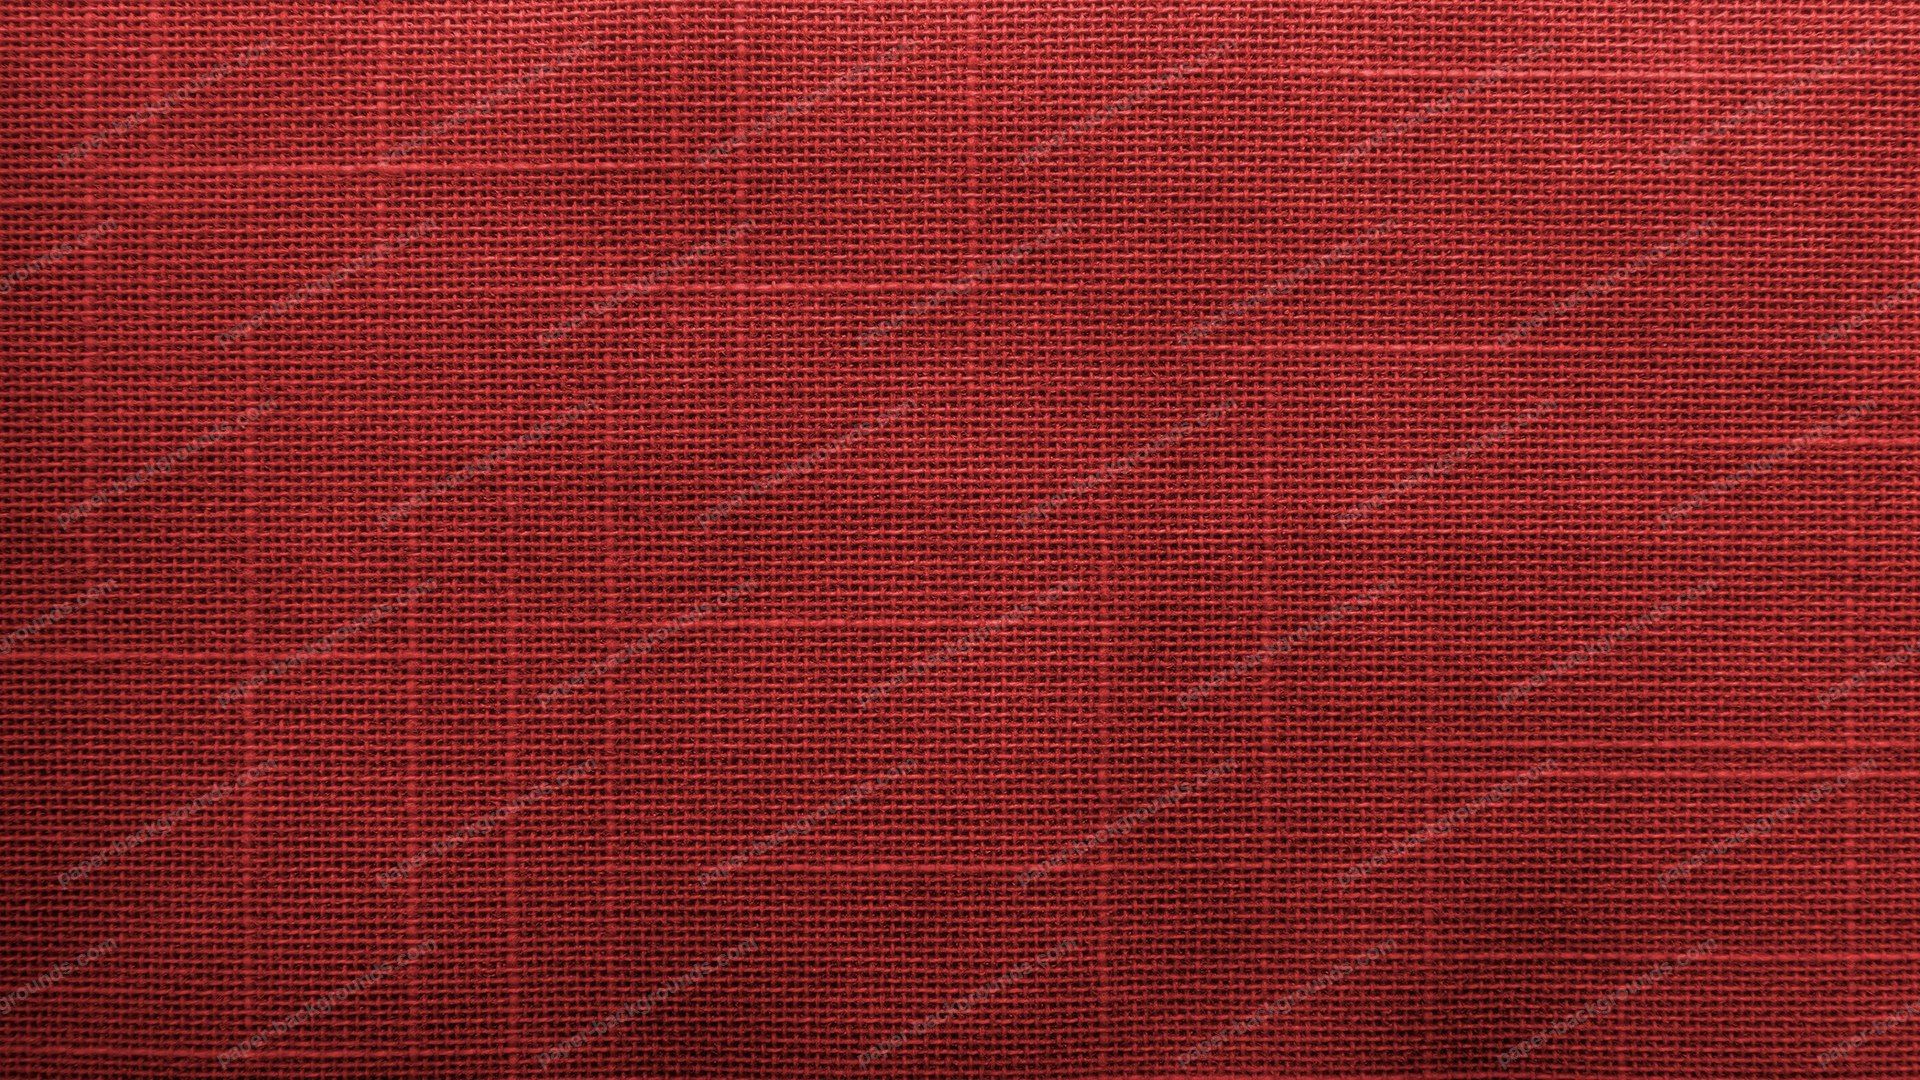 Canvas background hd